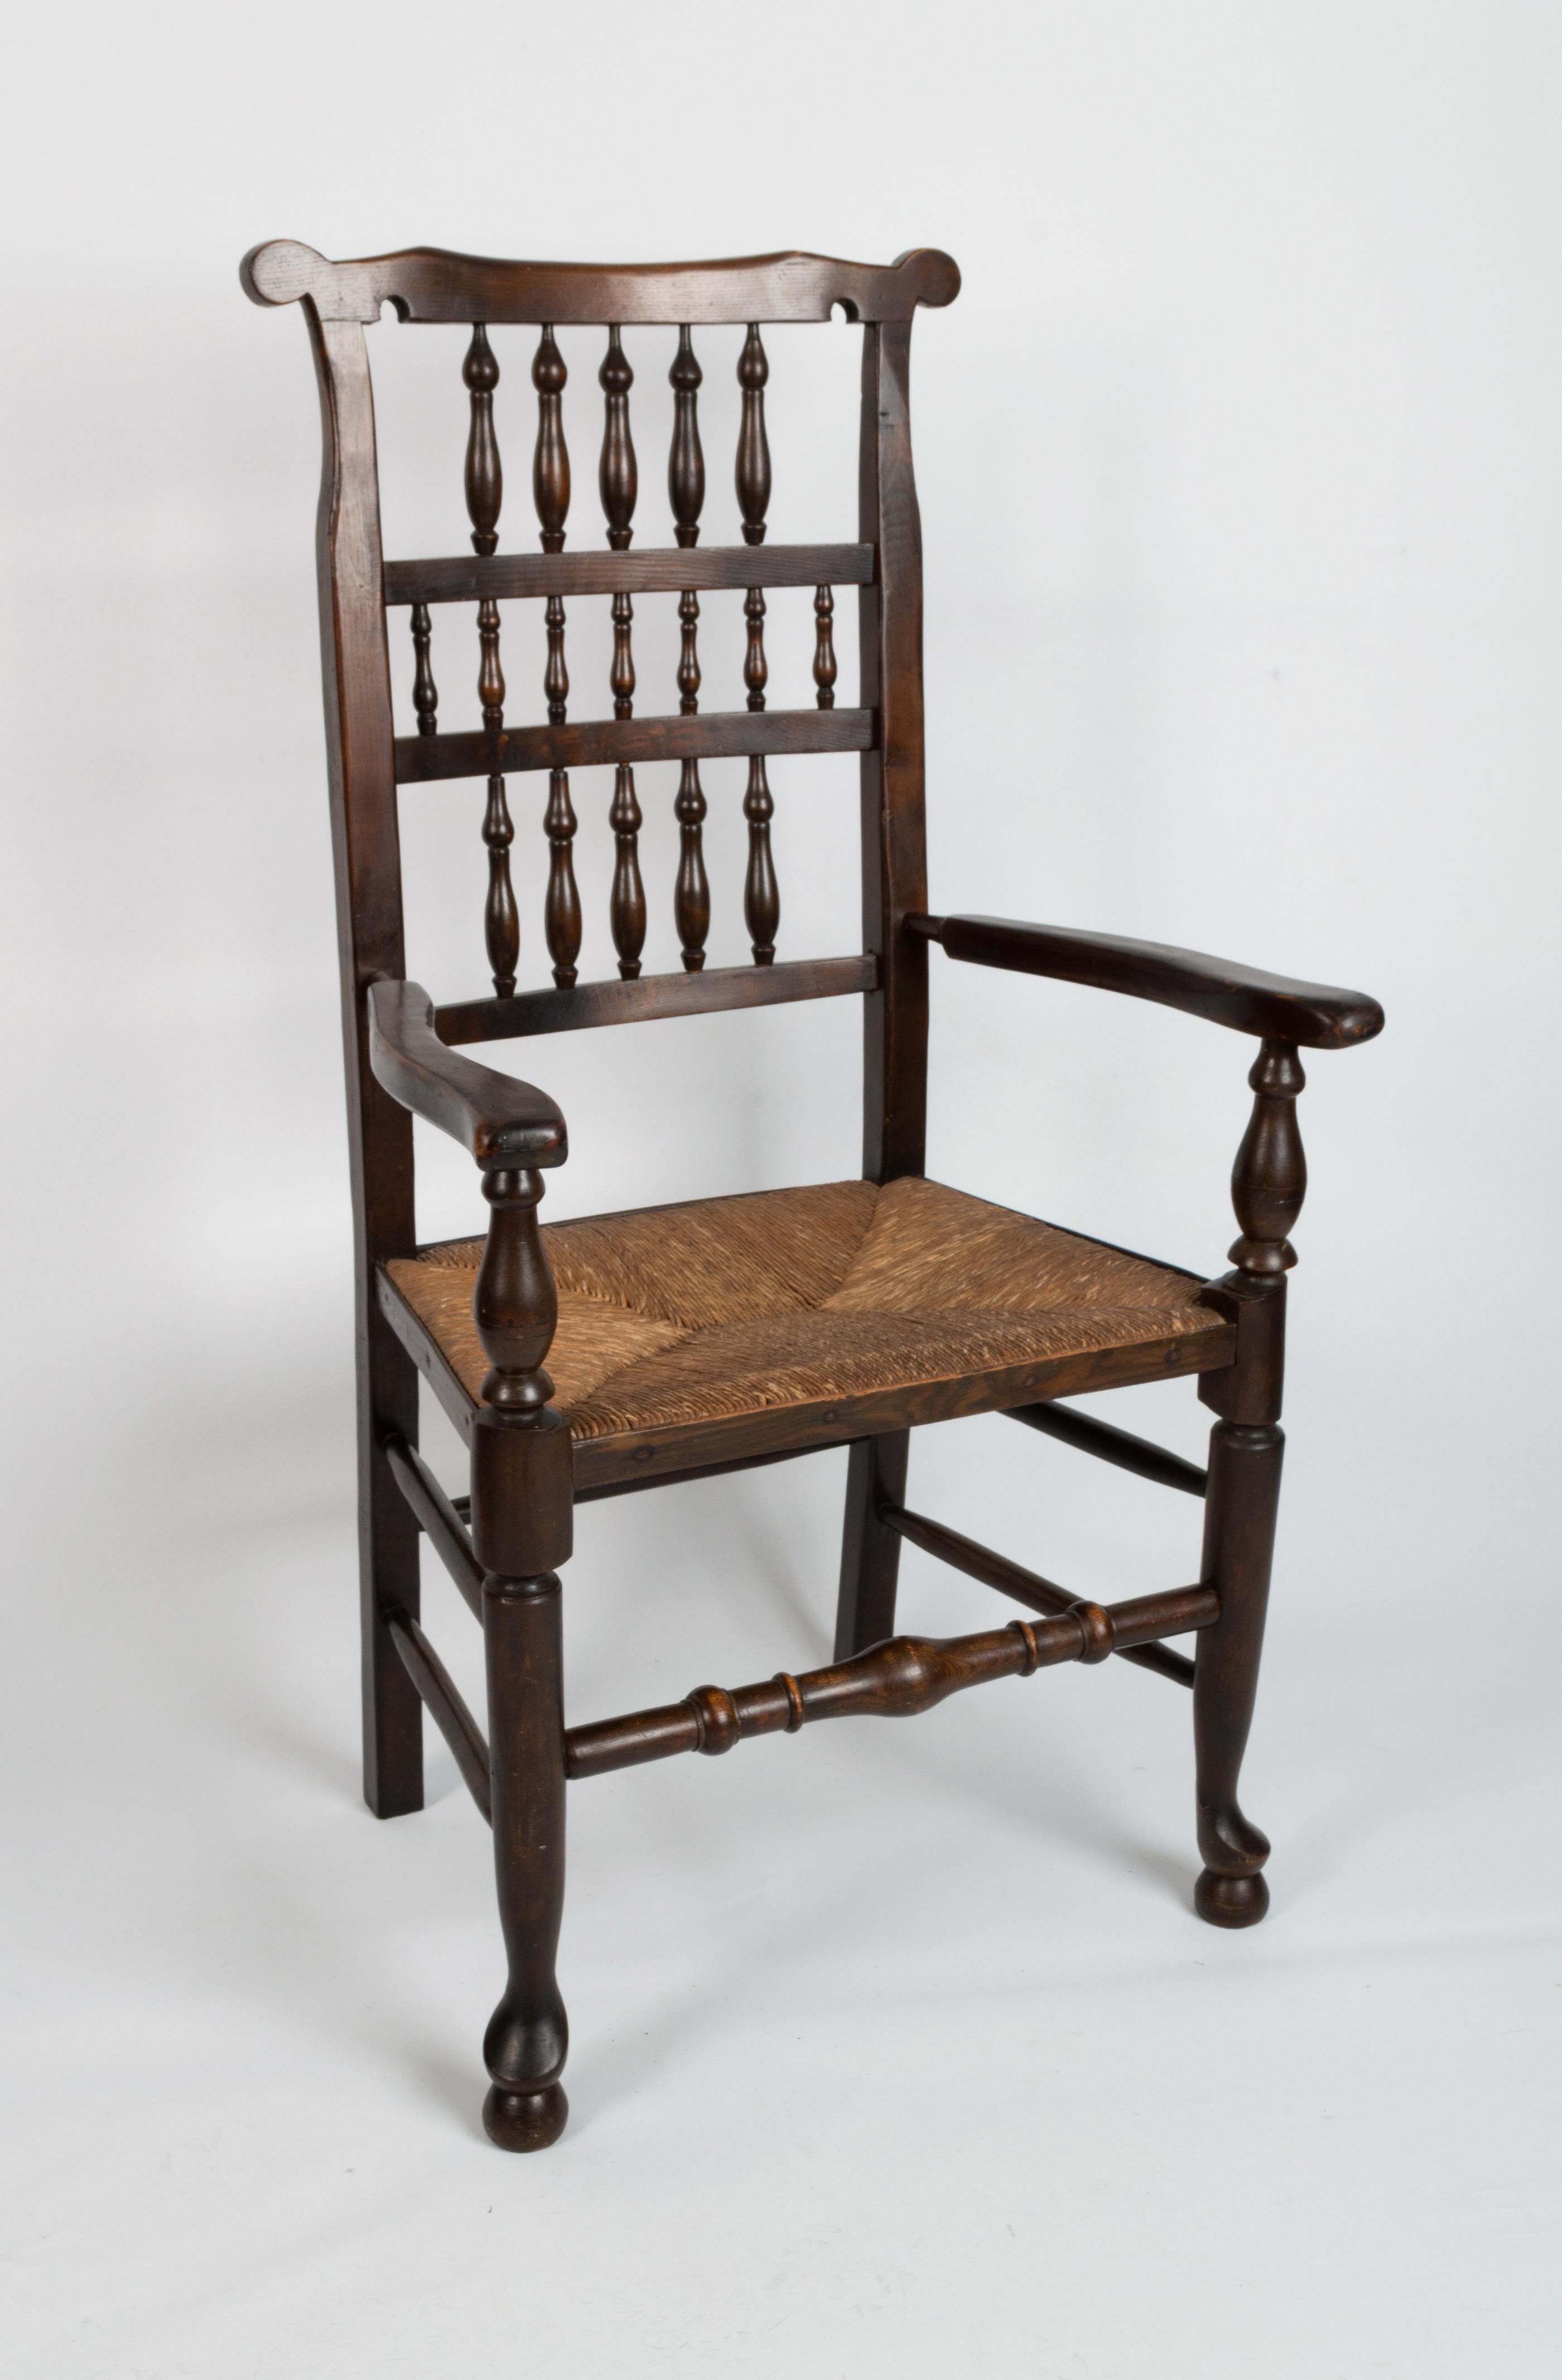 Antique English Arts & Crafts Oak Rush Elbow Chair C.1840

A 19th Century Lancashire Spindle back Hall Chair .
England, C.1840
Turned oak, 17 spindle back splat with rush seat.

Excellent solid and sturdy condition commensurate of age. Historic